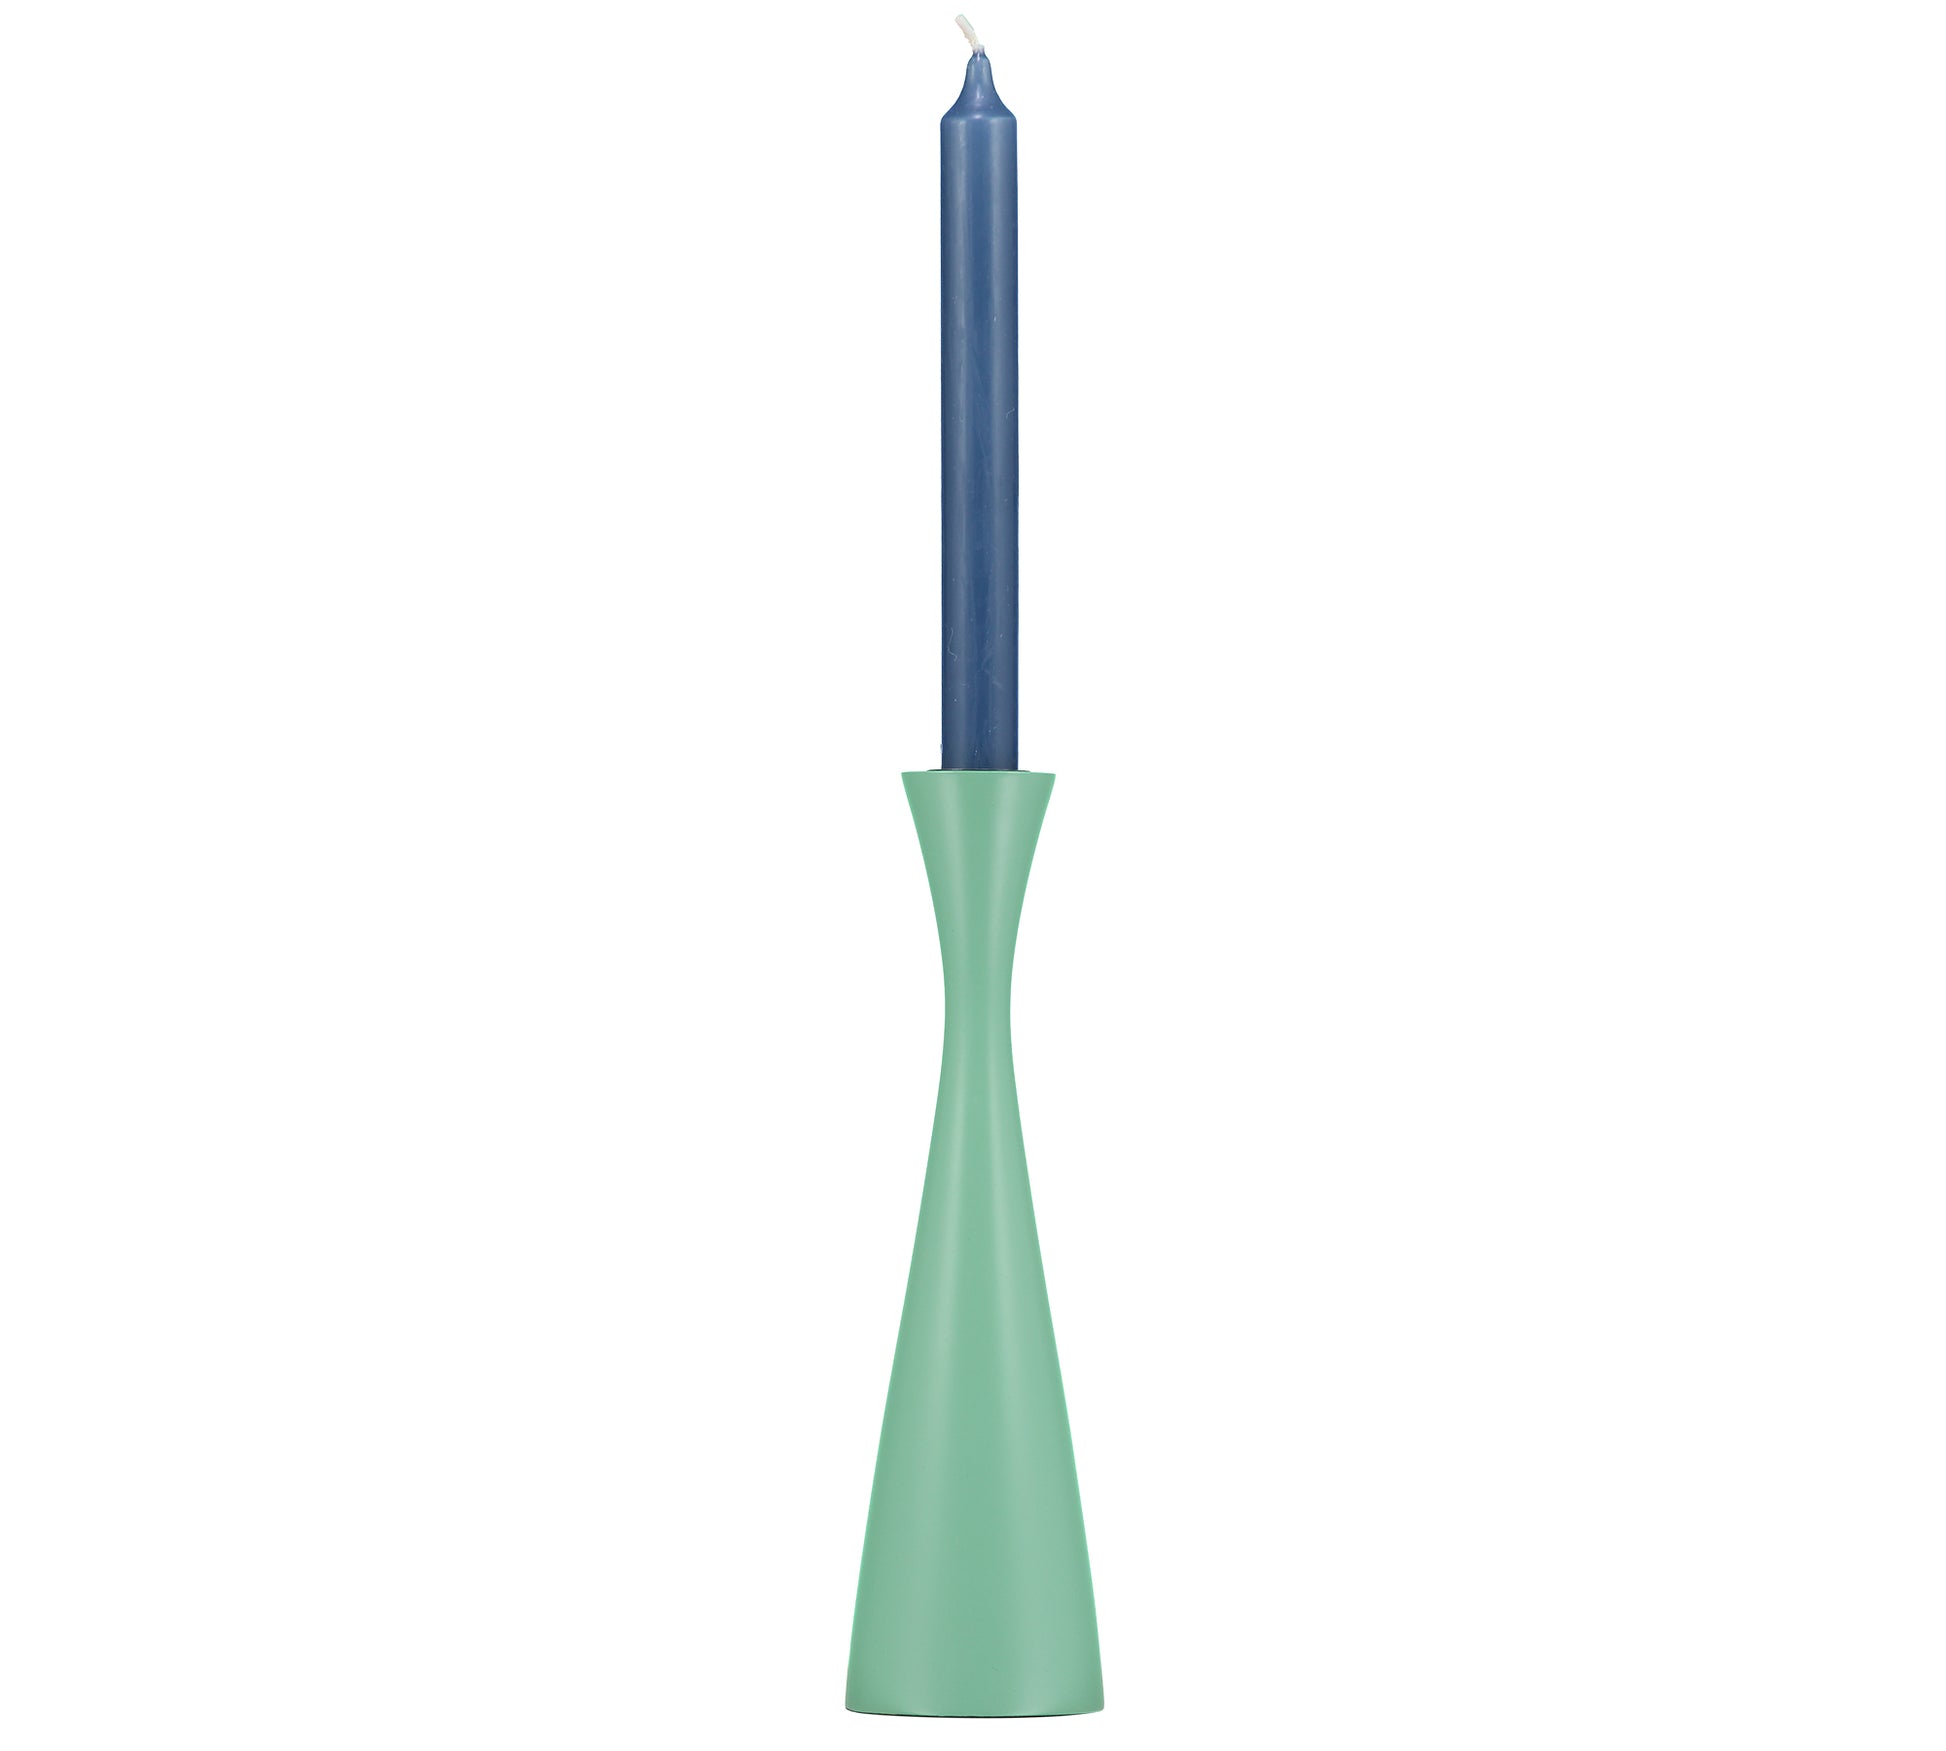 Tal Opaline Green Candleholder with candle